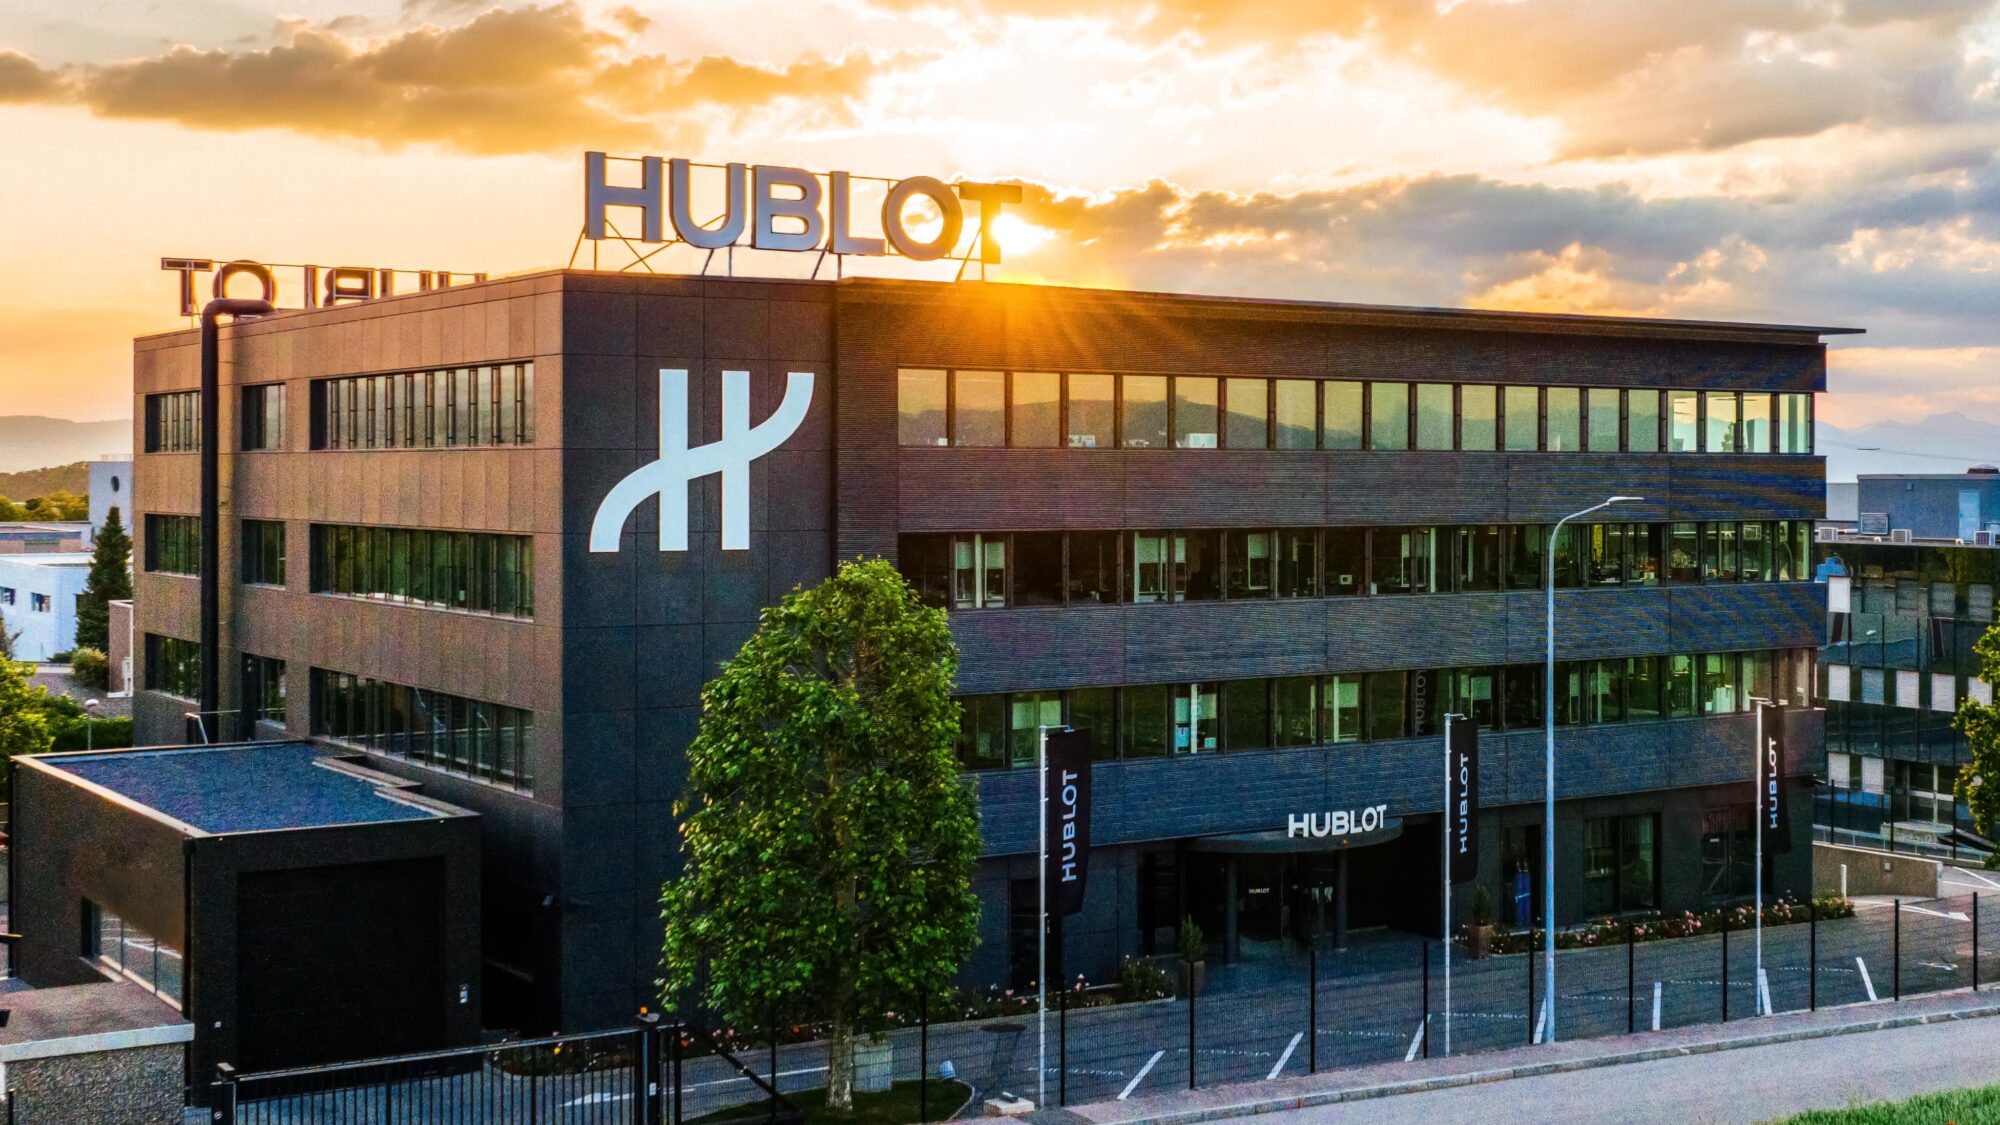 The Hublot Manufacture in Nyon on the shores of Lake Genevais